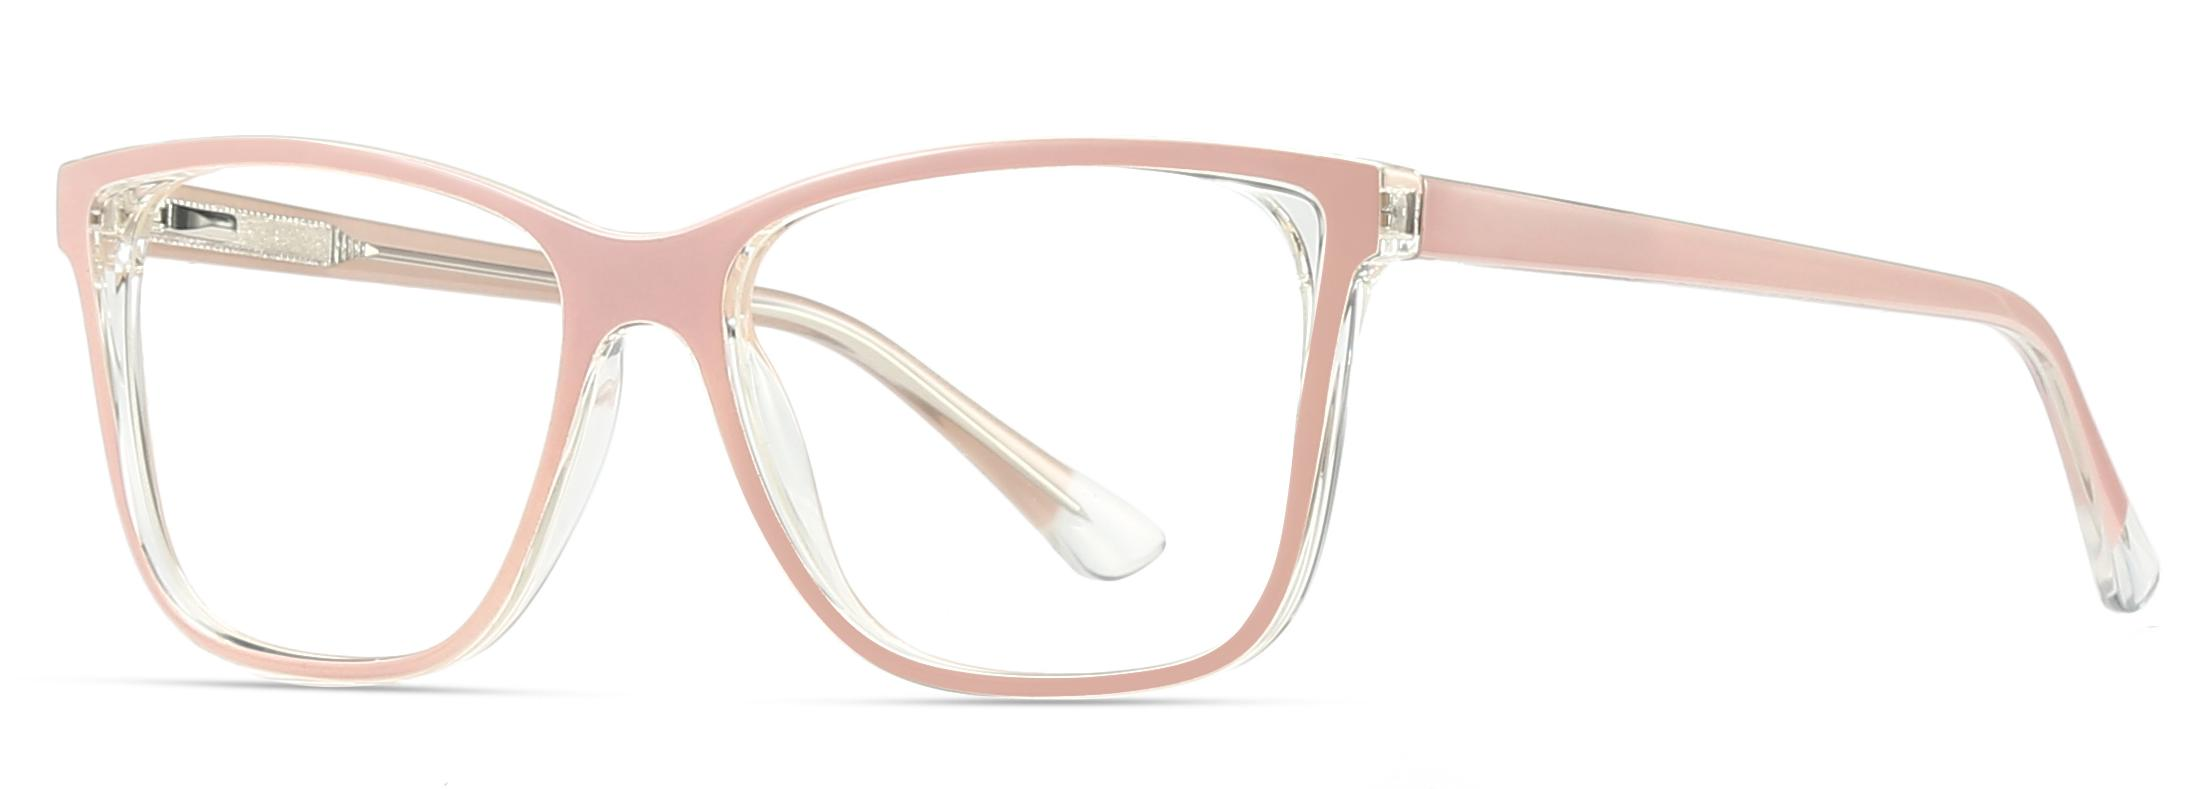 Readymade Cat Eye Shape Clear Color sa loob ng Temples TR90+CP Women Optical Frame #2015